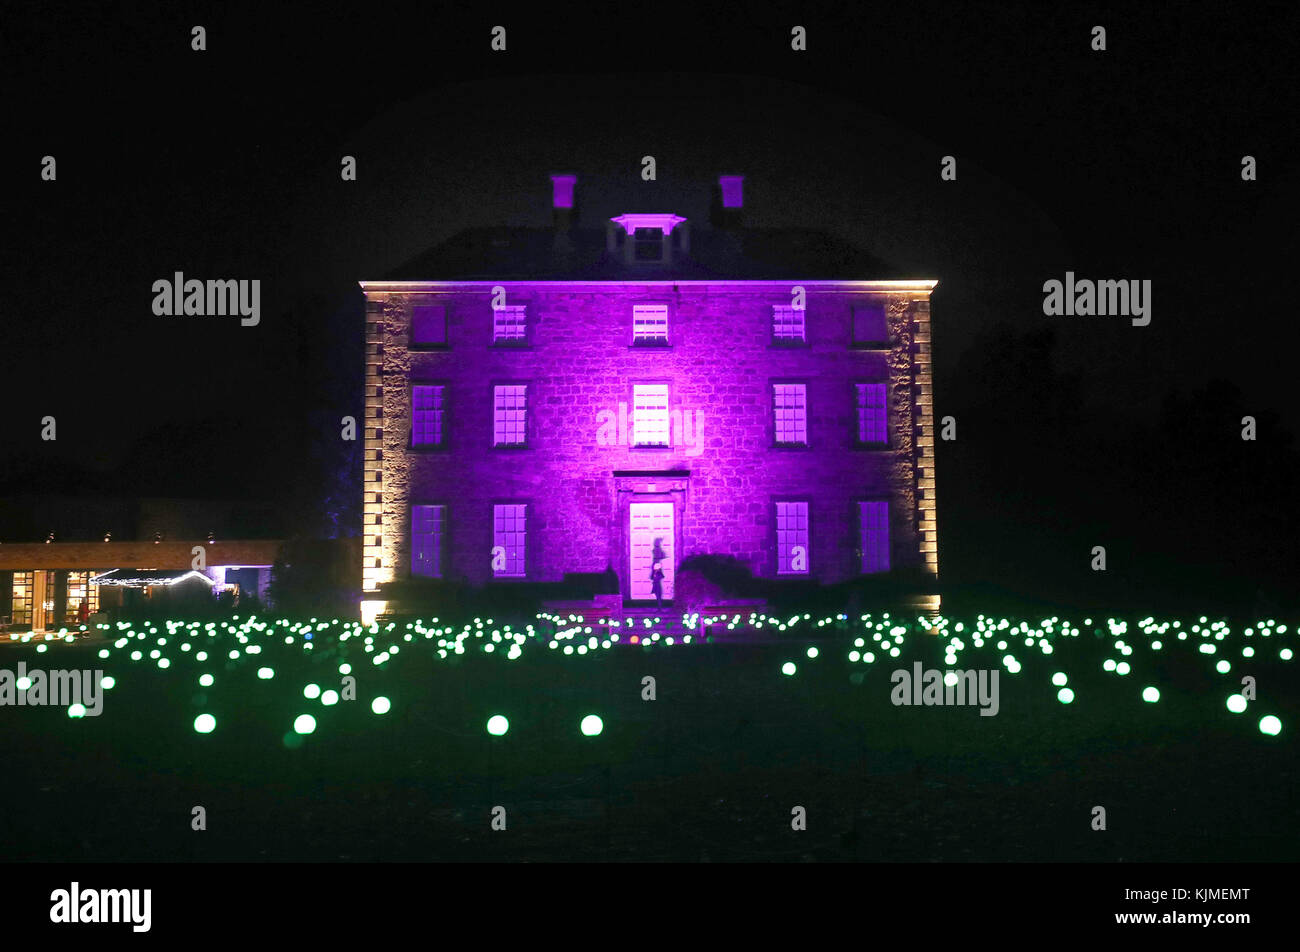 Bloom Squidsoup in front of Inverleith House is one of a series of light installations that feature in Christmas at the Botanics which is a one-mile illuminated trail through the Royal Botanic Garden Edinburgh. Stock Photo